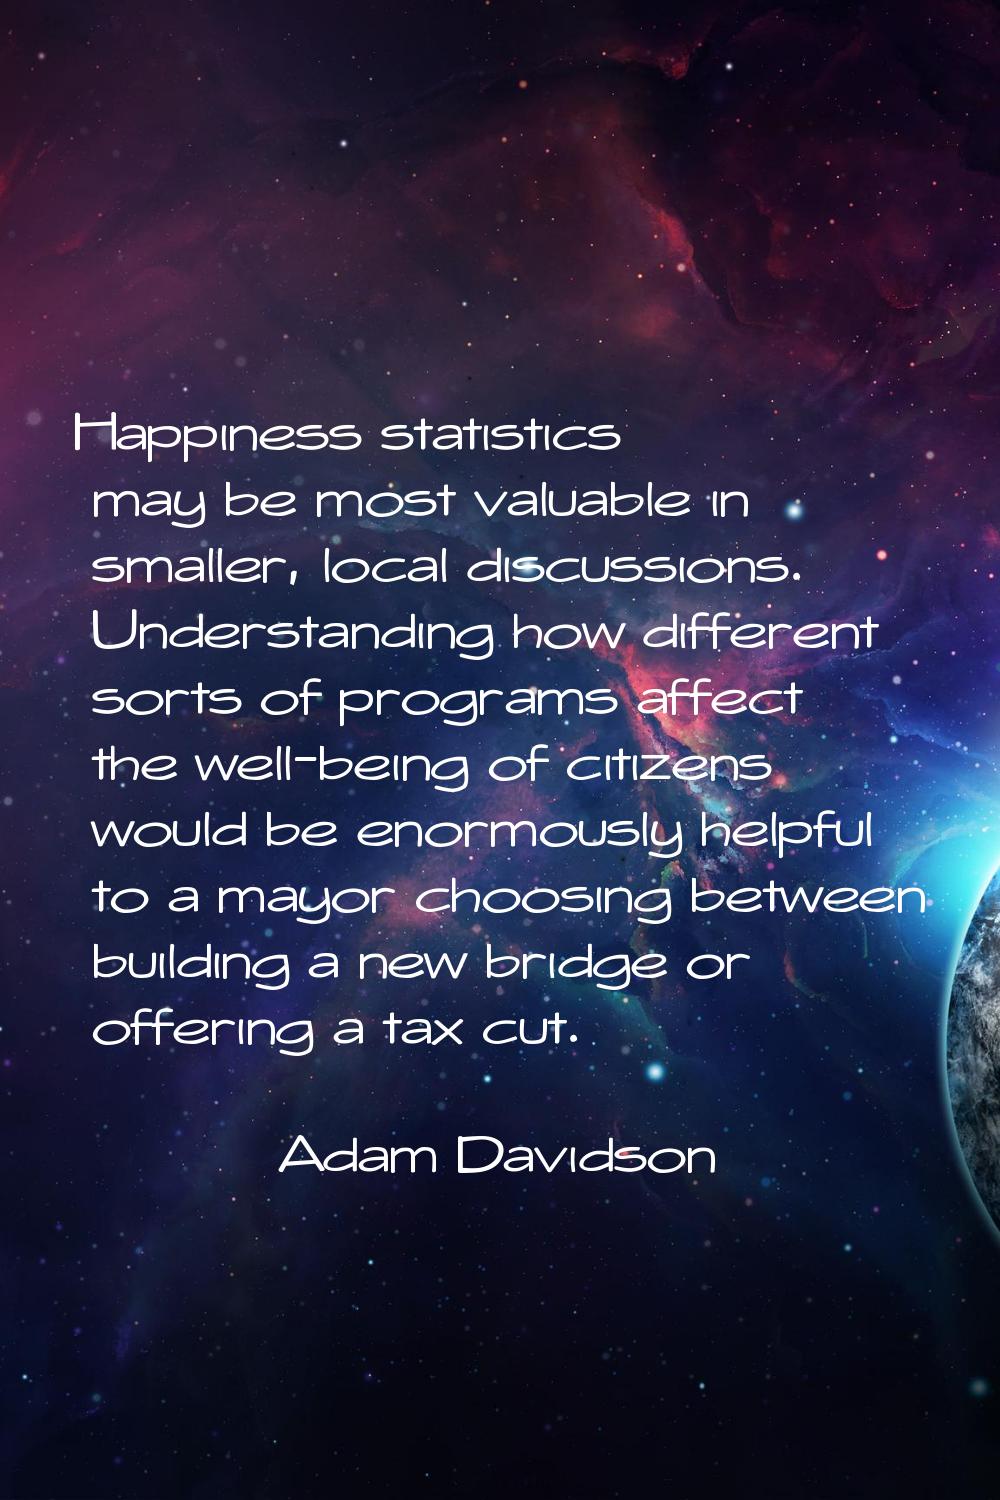 Happiness statistics may be most valuable in smaller, local discussions. Understanding how differen